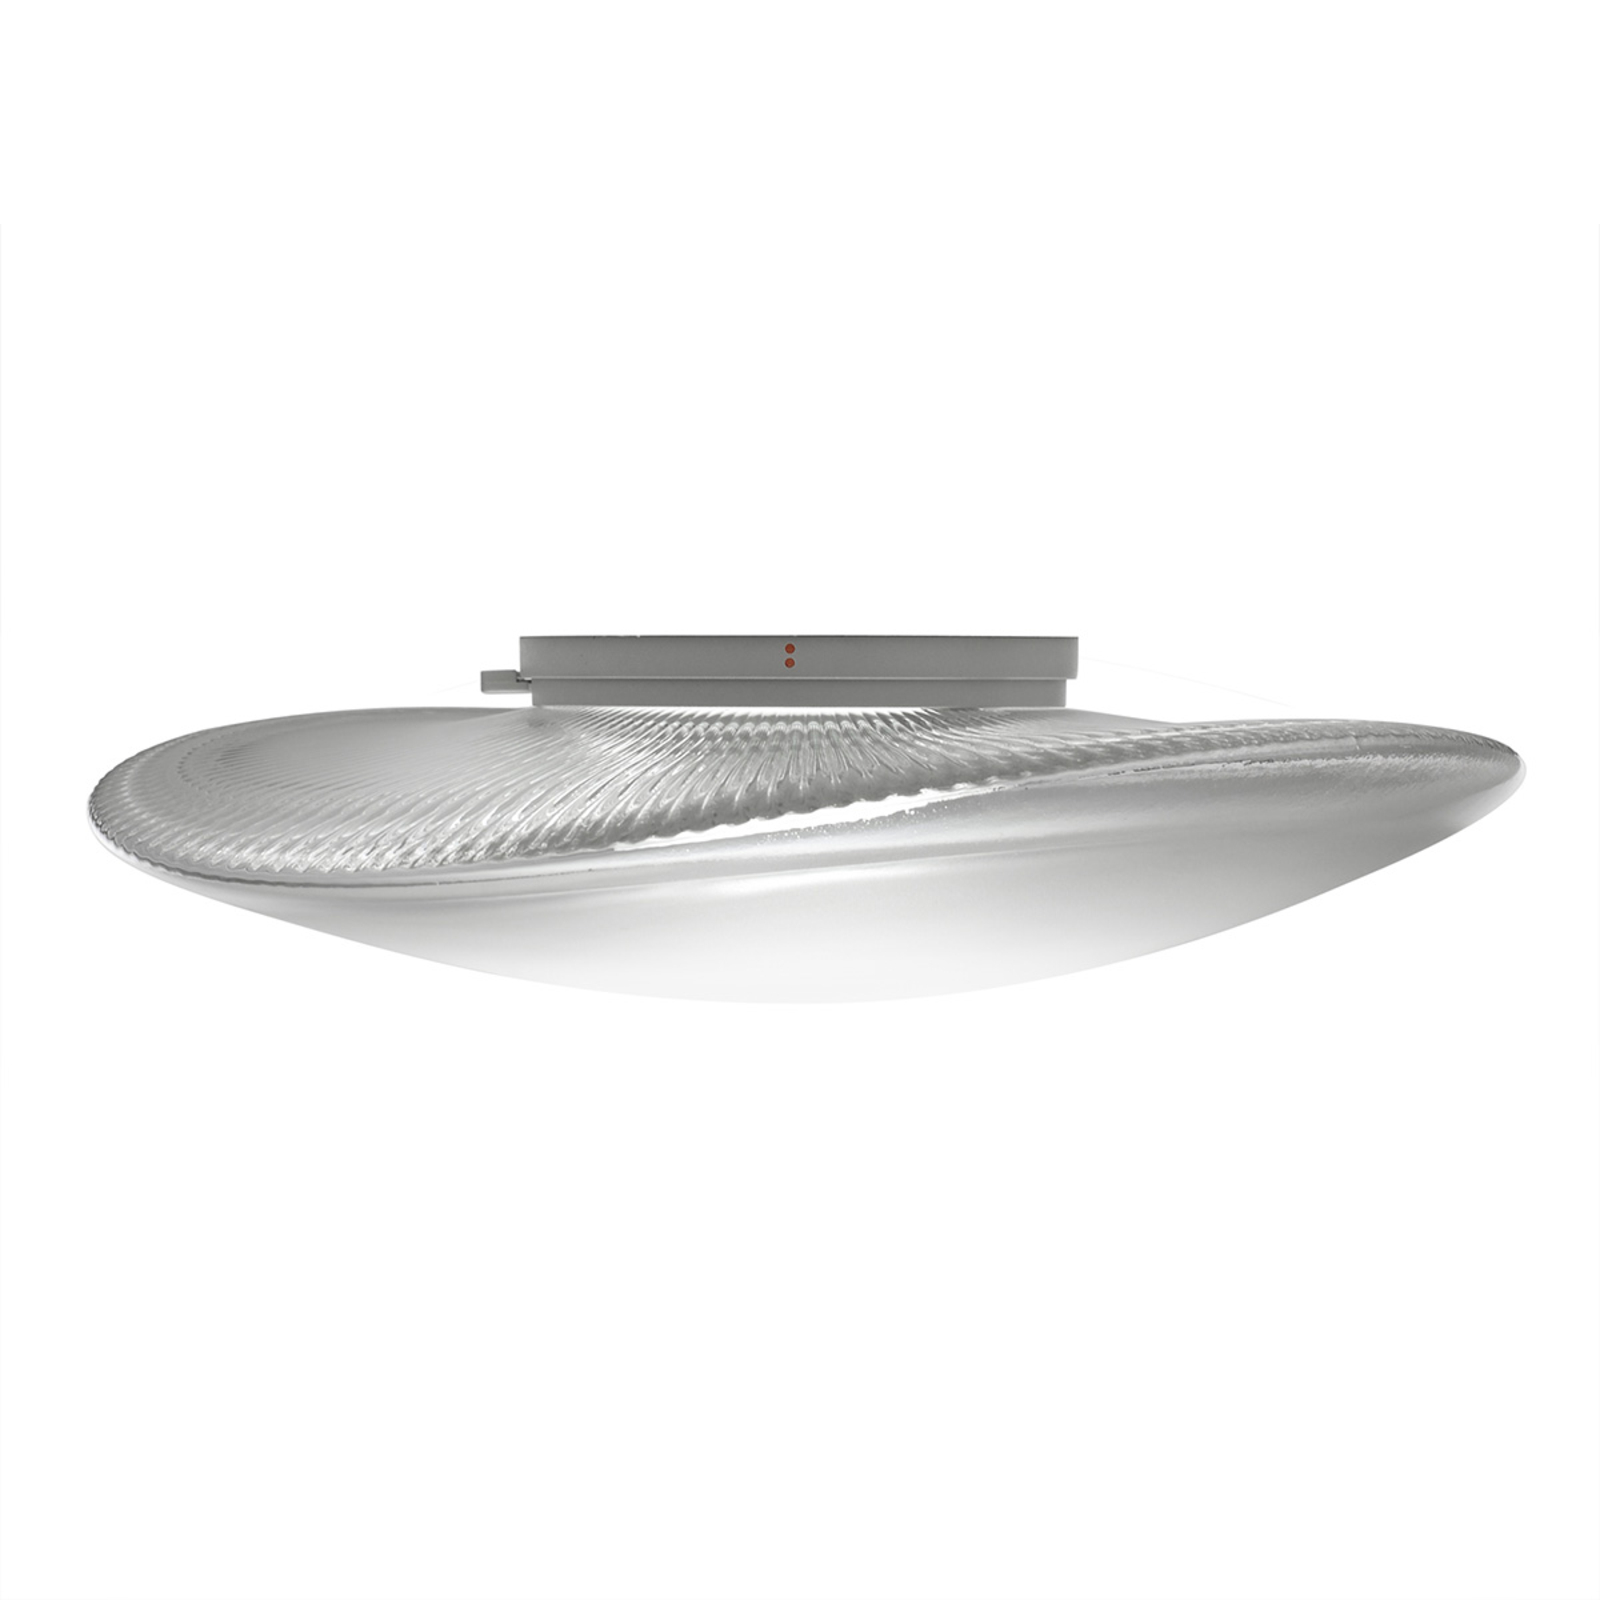 Powerful Loop glass ceiling light with LED 3000 K